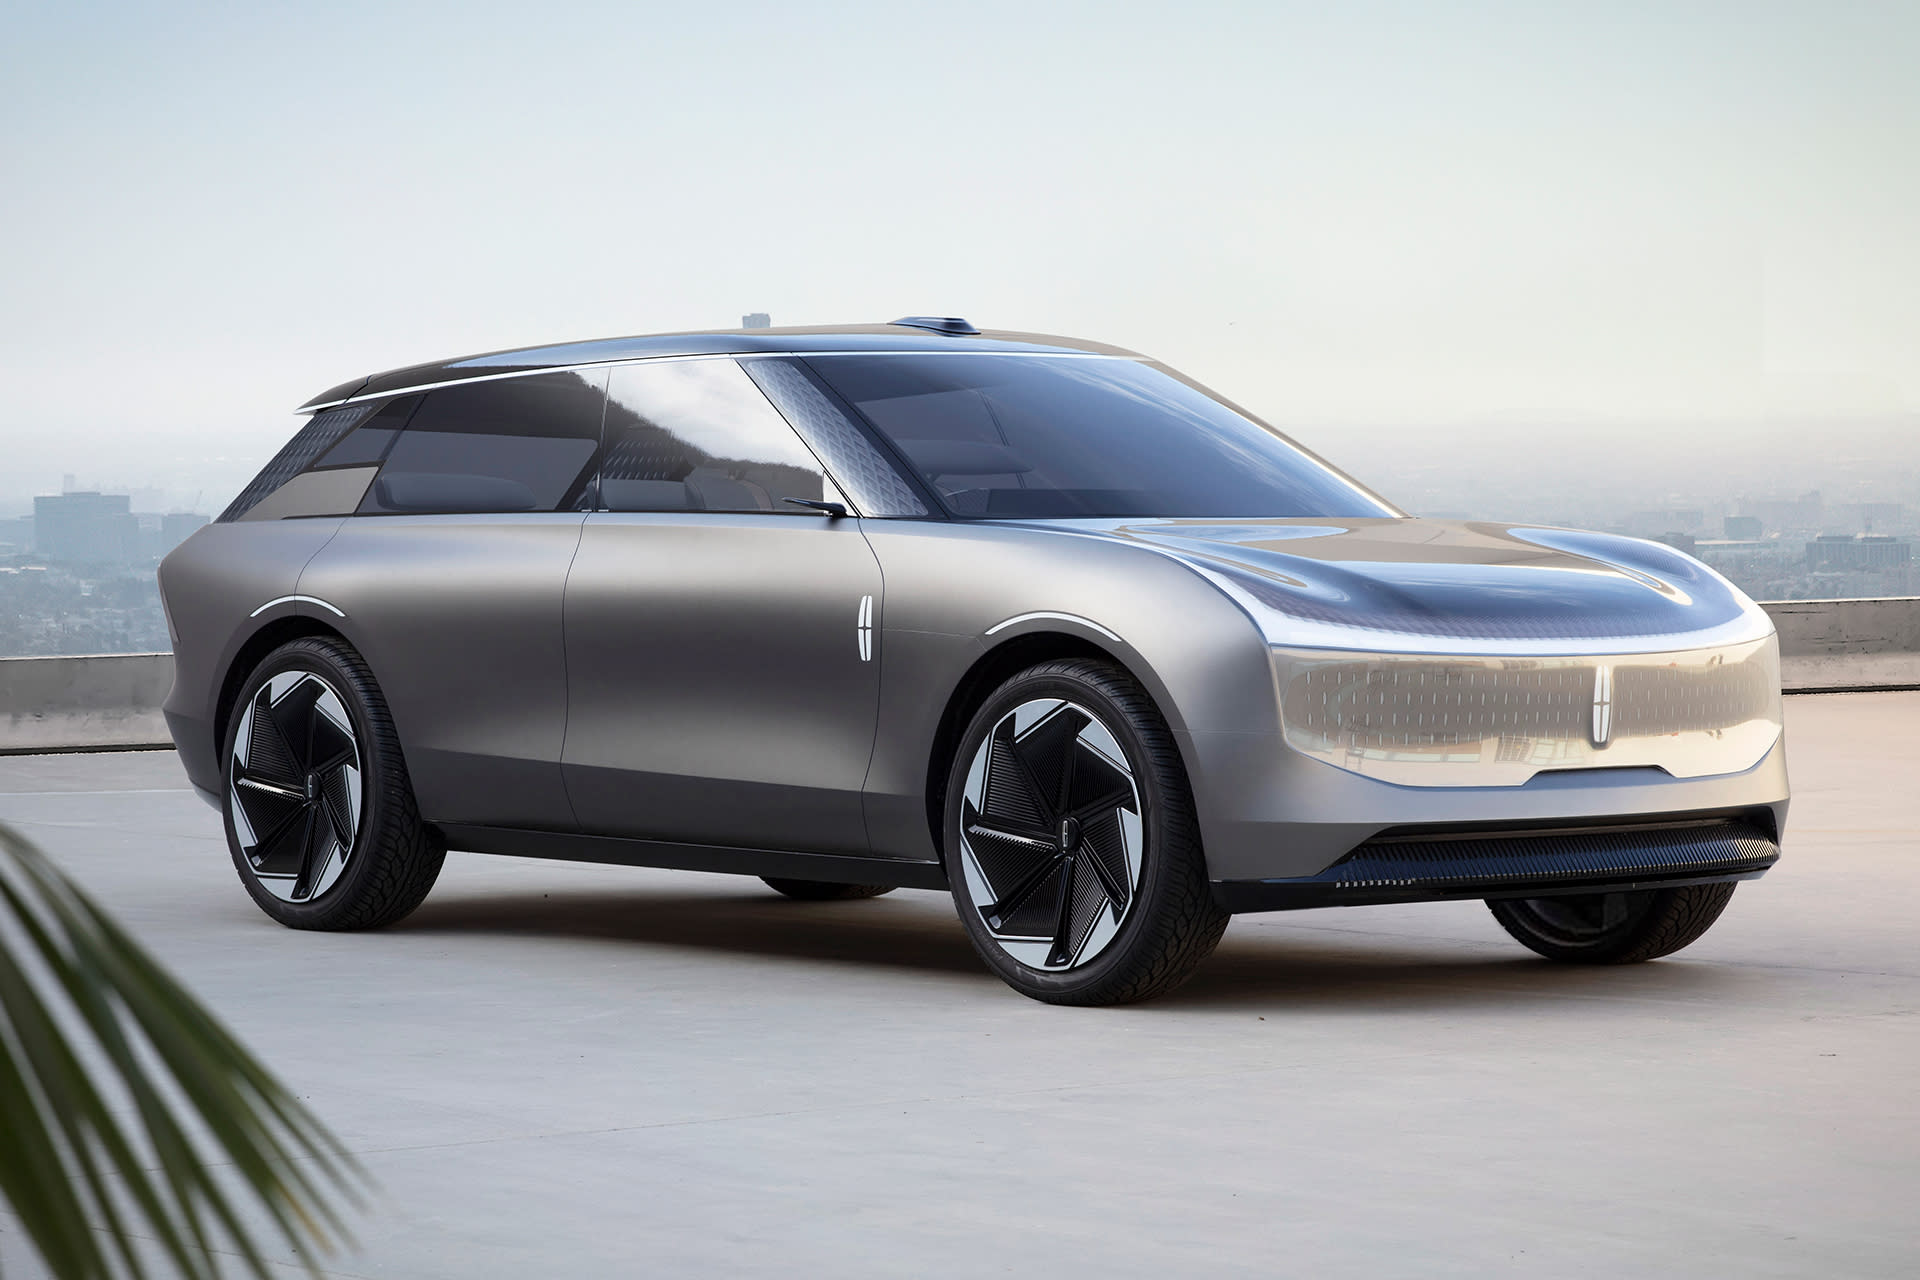 Lincoln's first electric vehicle concept is the Star SUV | Engadget